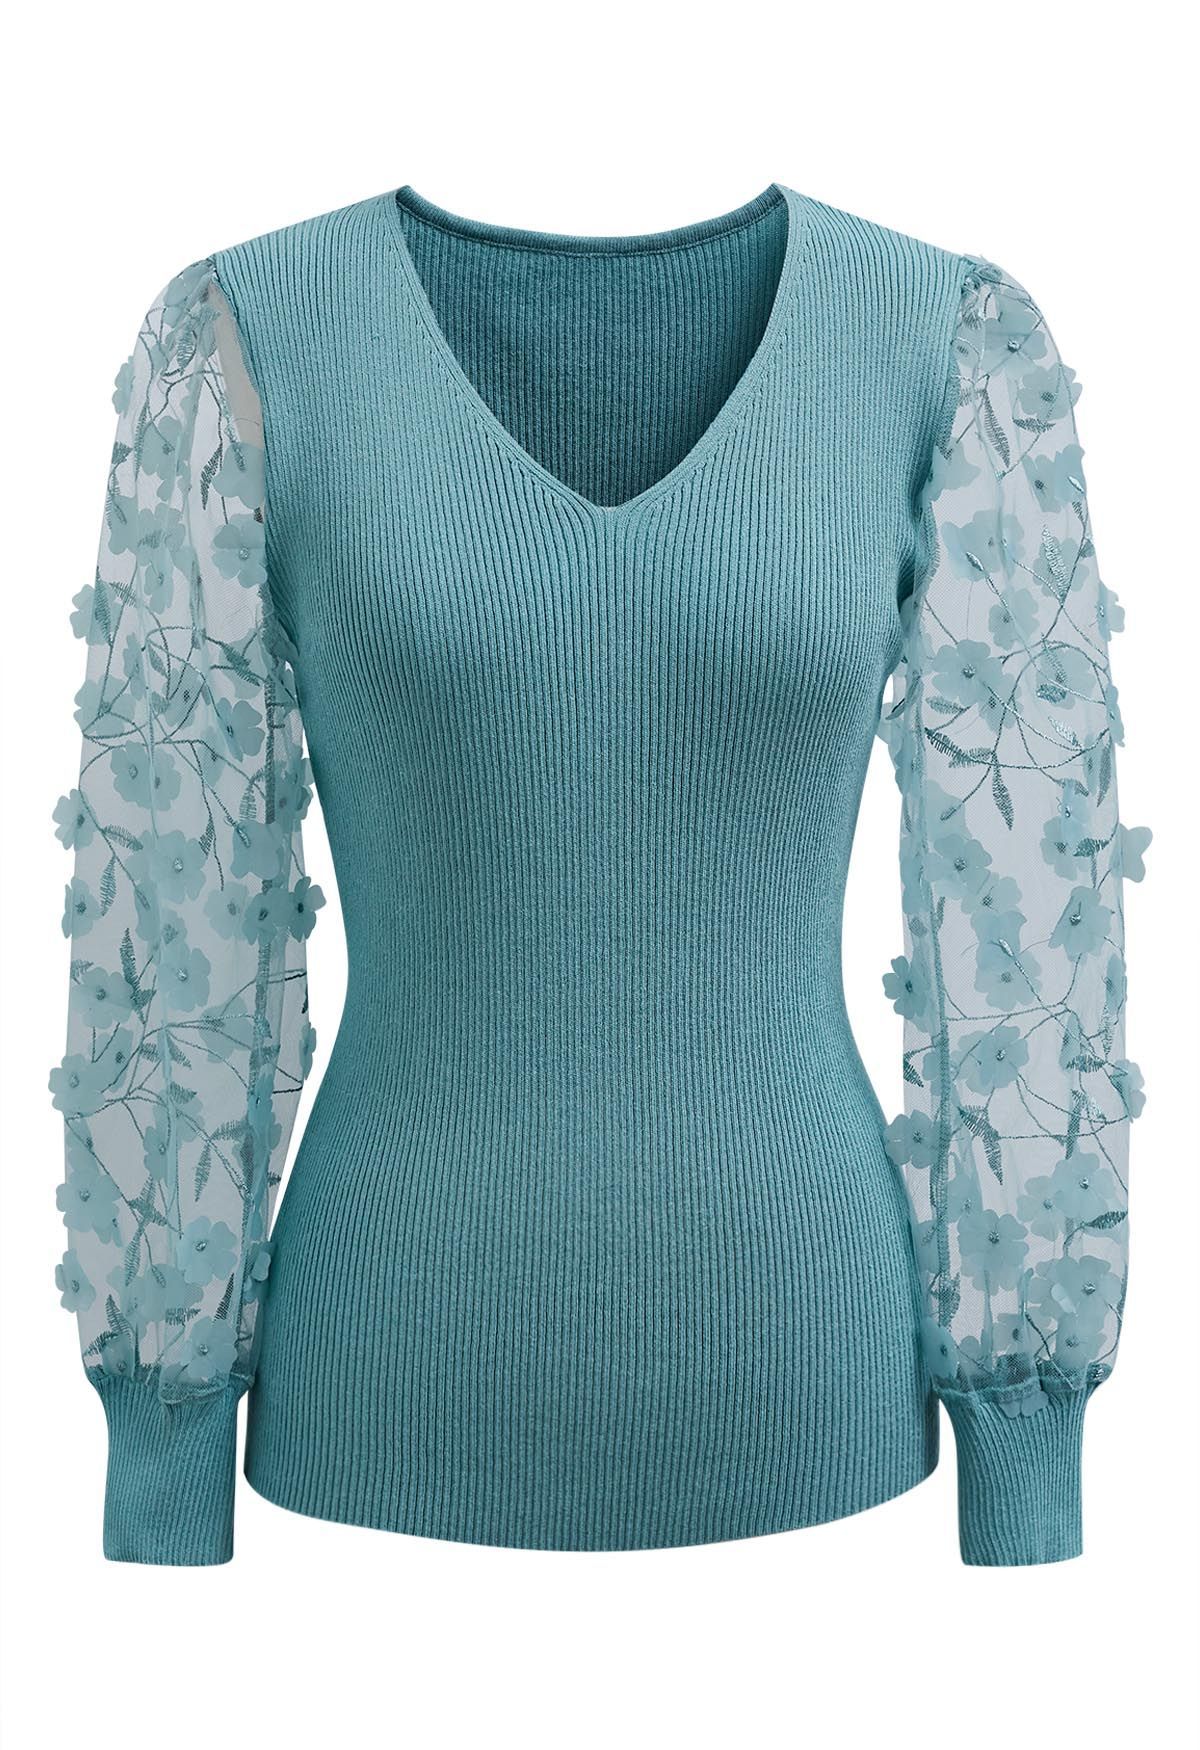 3D Floret Mesh Sleeves Spliced Knit Top in Teal | Chicwish